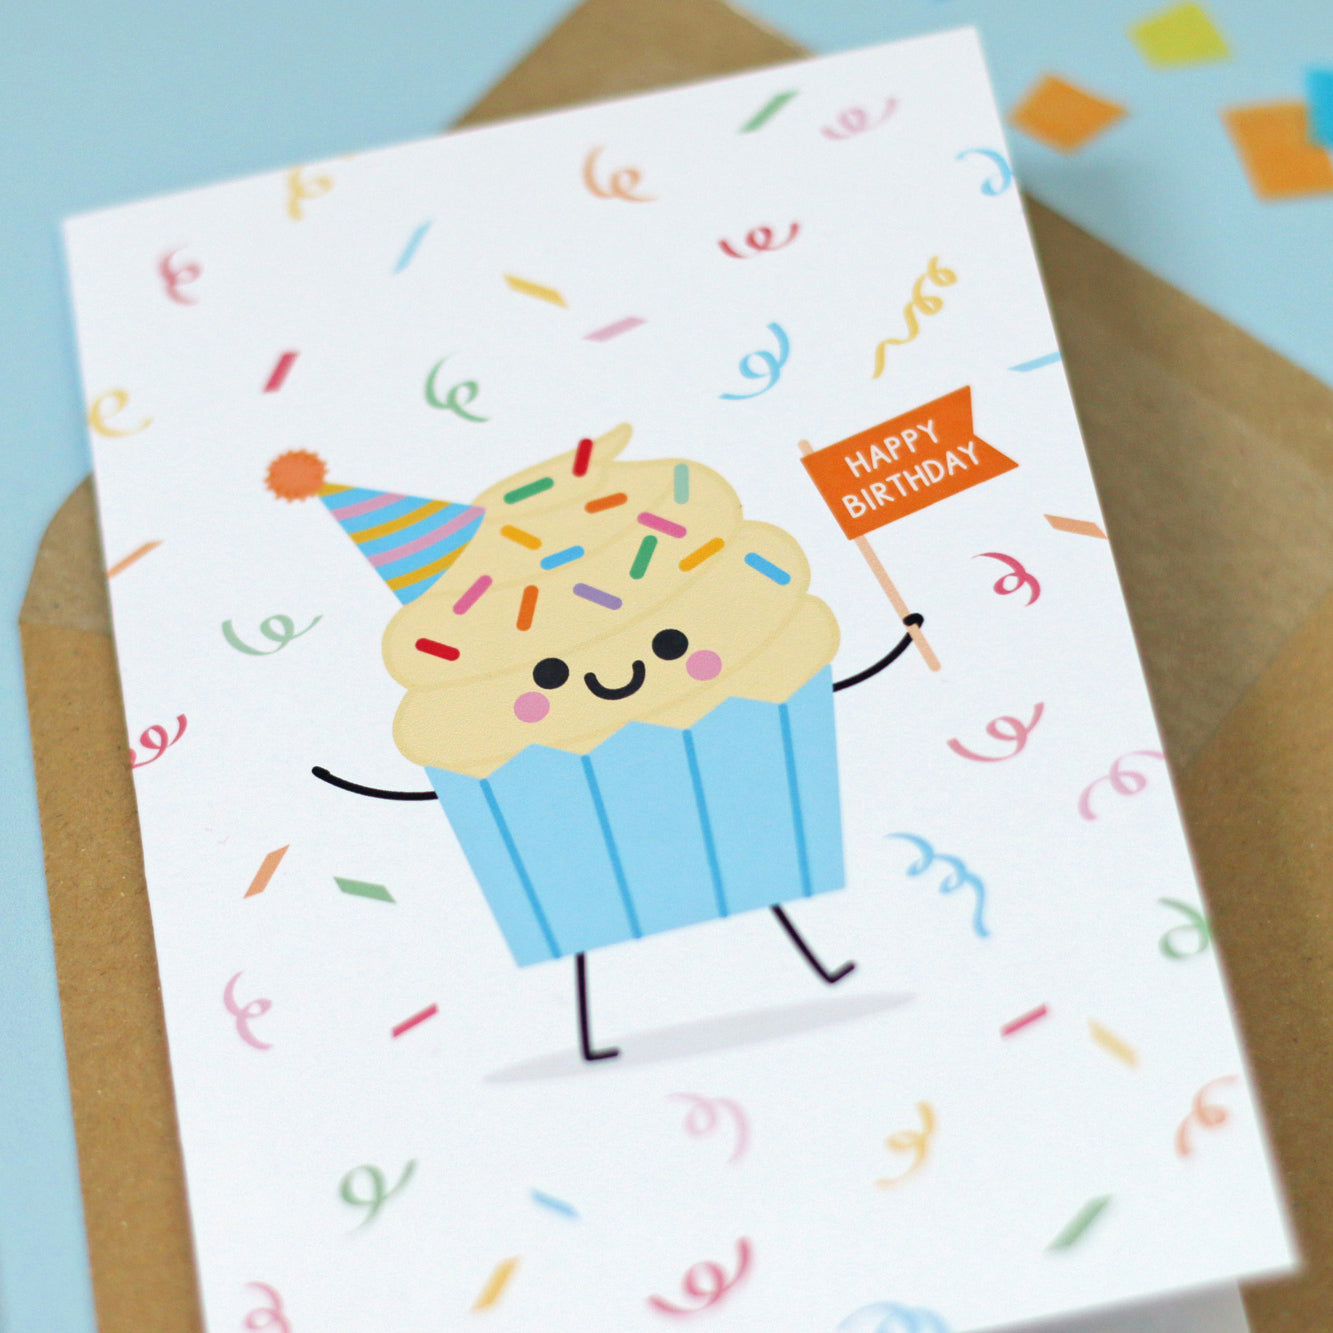 close up of kawaii style greeting card, featuring a vanilla cupcake with party hat and orange banner with the words 'HAPPY BIRTHDAY' on it